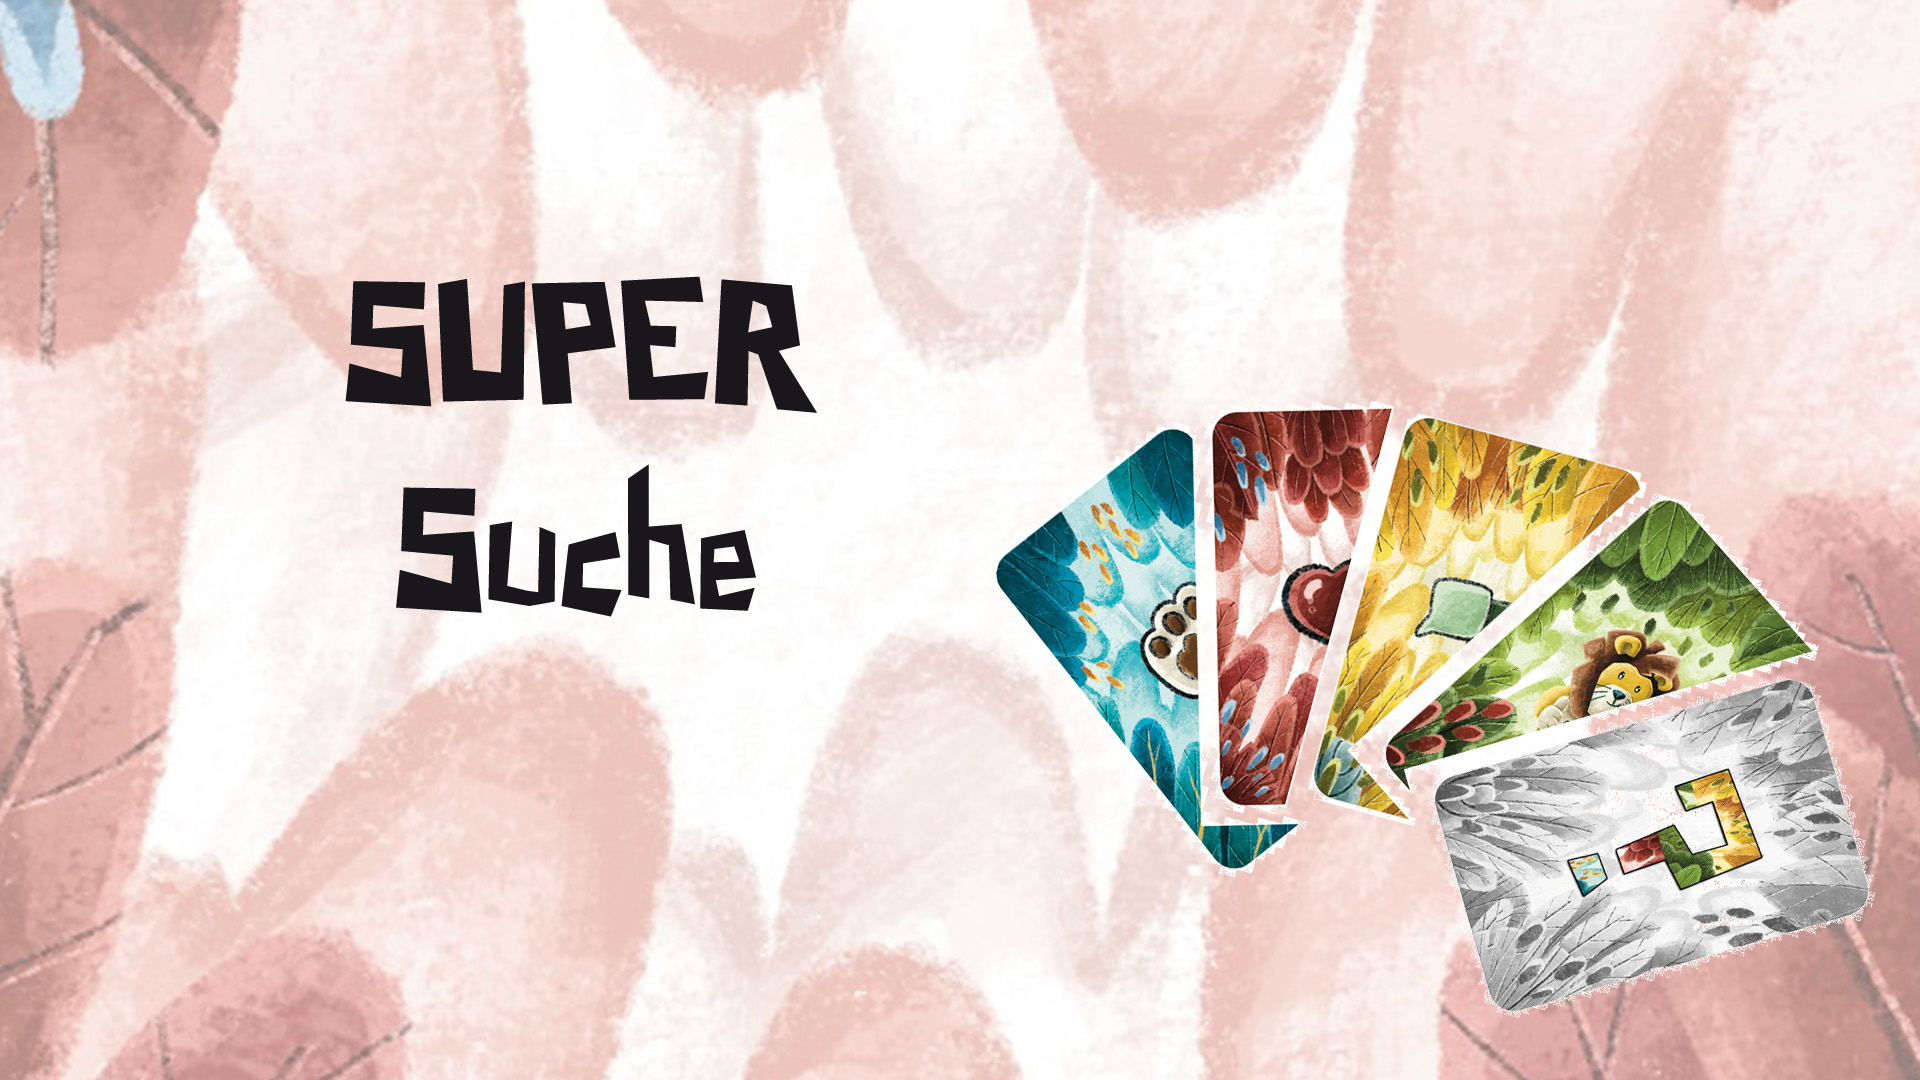 You are currently viewing Super – Suche